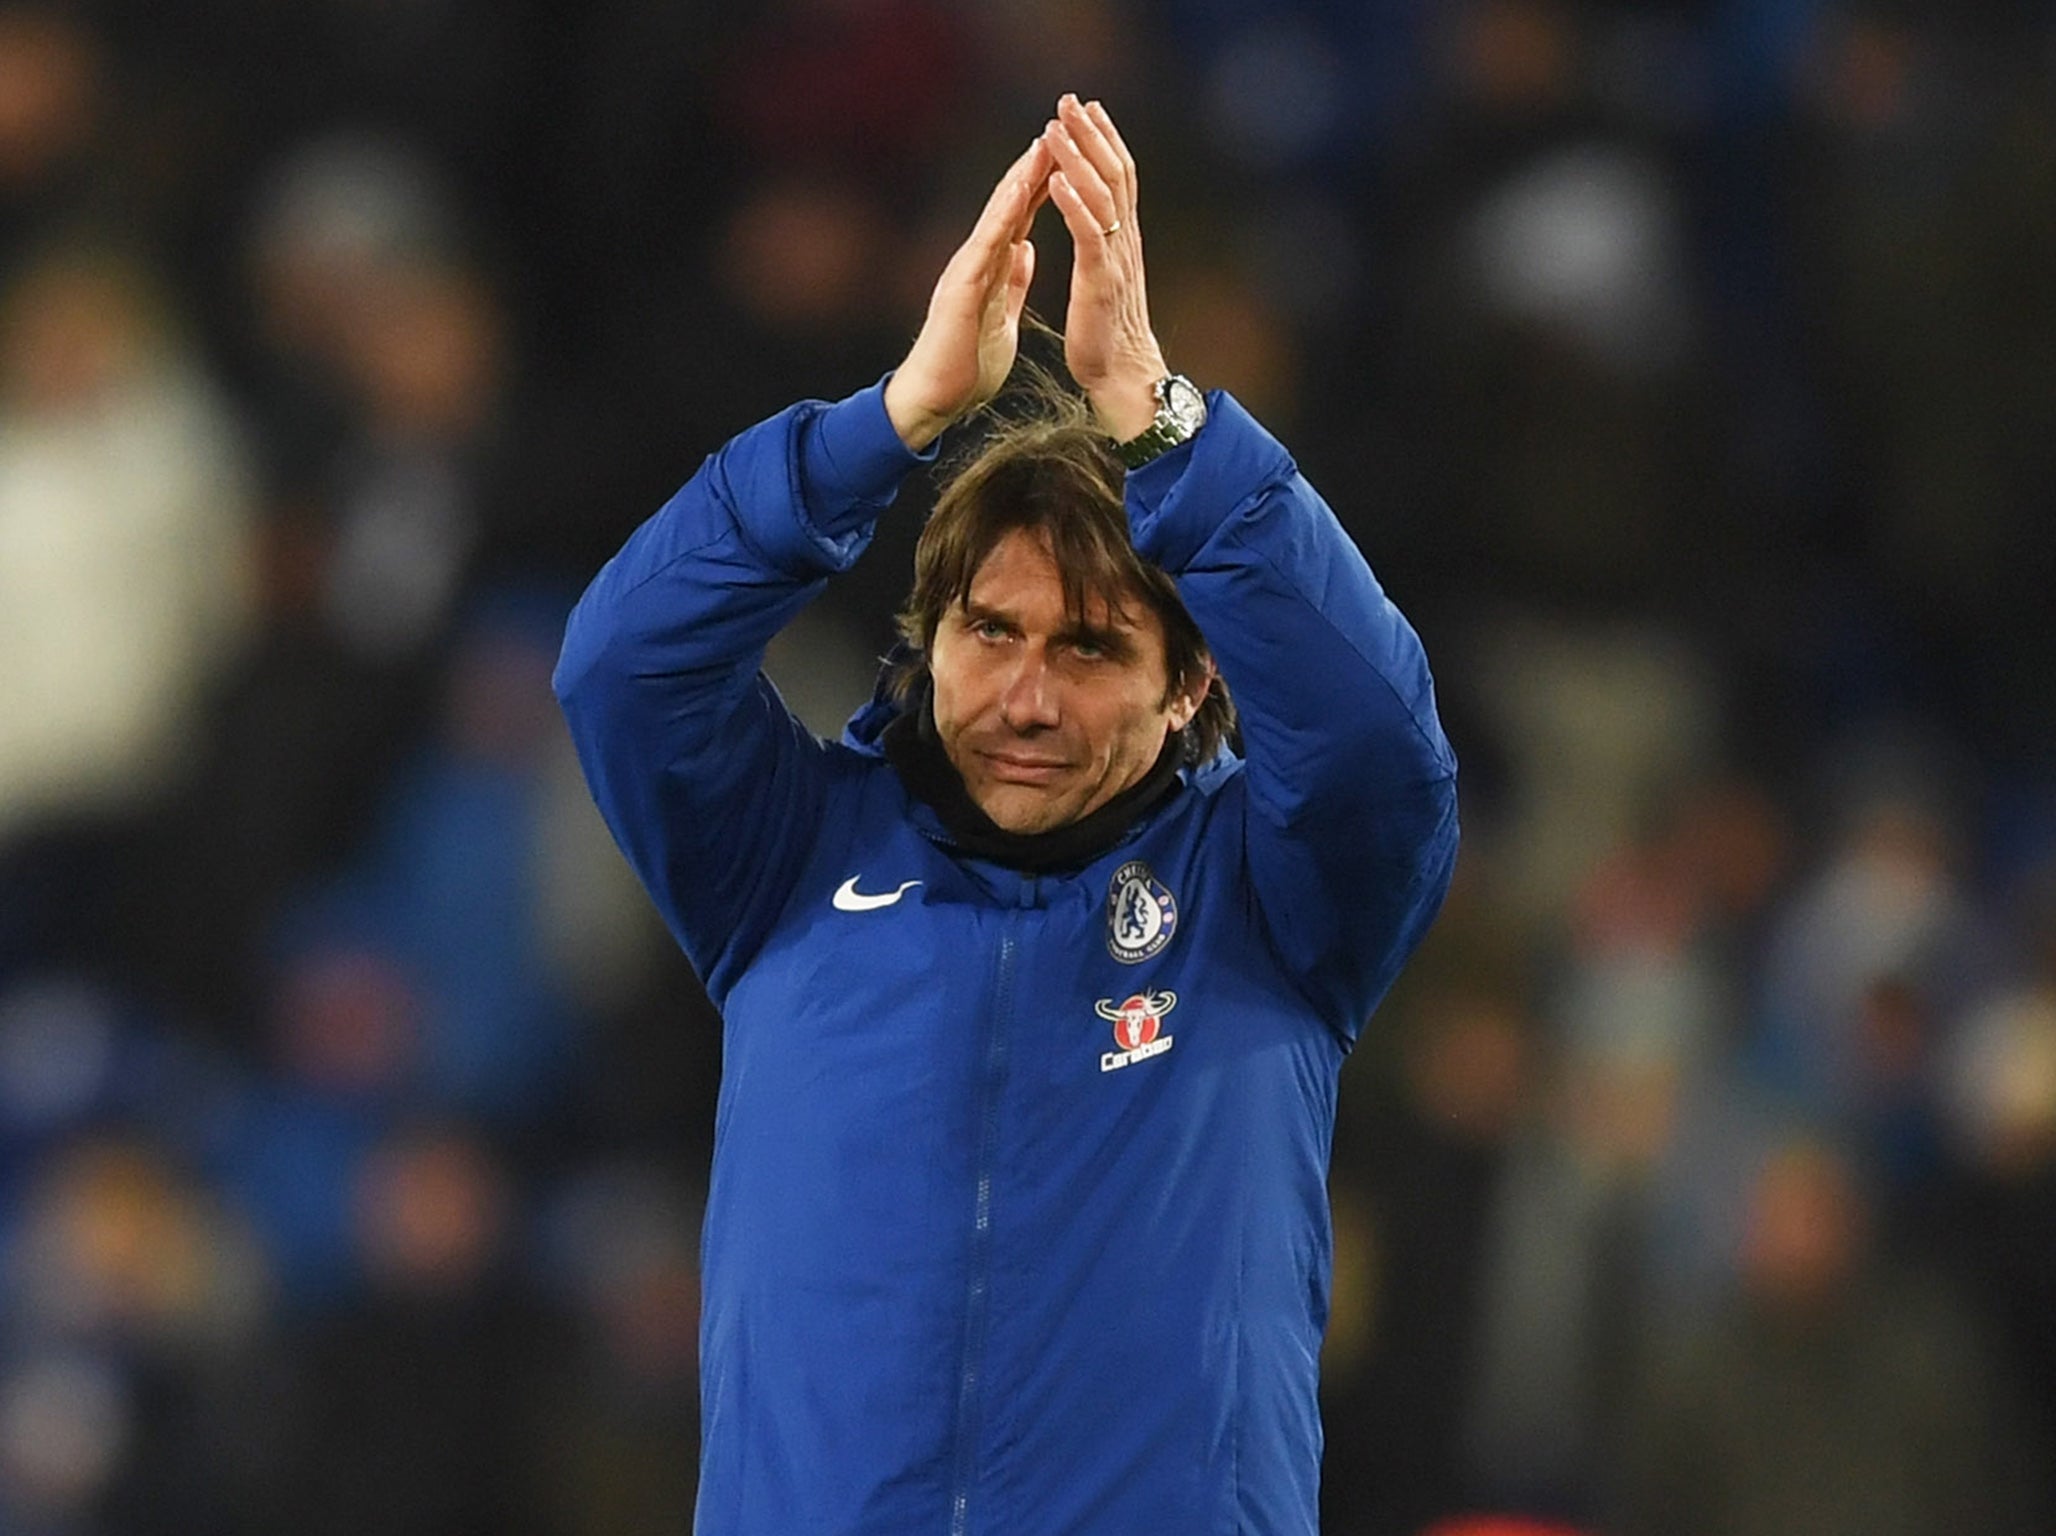 Antonio Conte delighted with the &apos;fighting spirit, desire and will&apos; of his Chelsea players in Leicester win